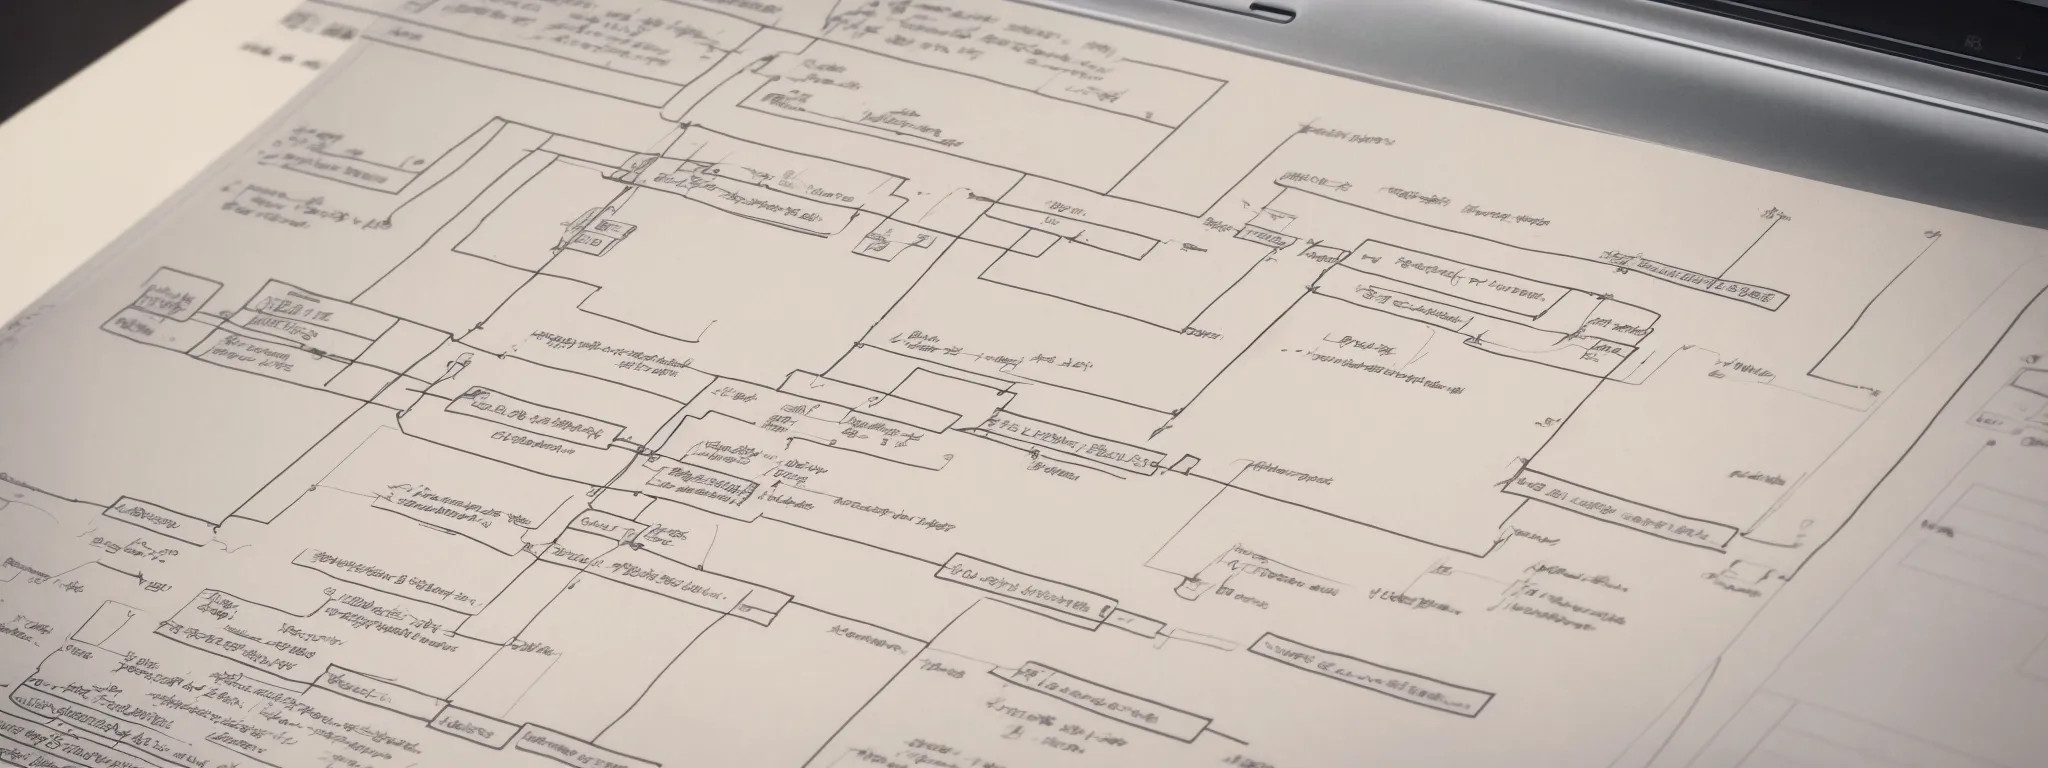 an open laptop displaying a complex flowchart, symbolizing meticulous website structure planning for improved seo and user experience.